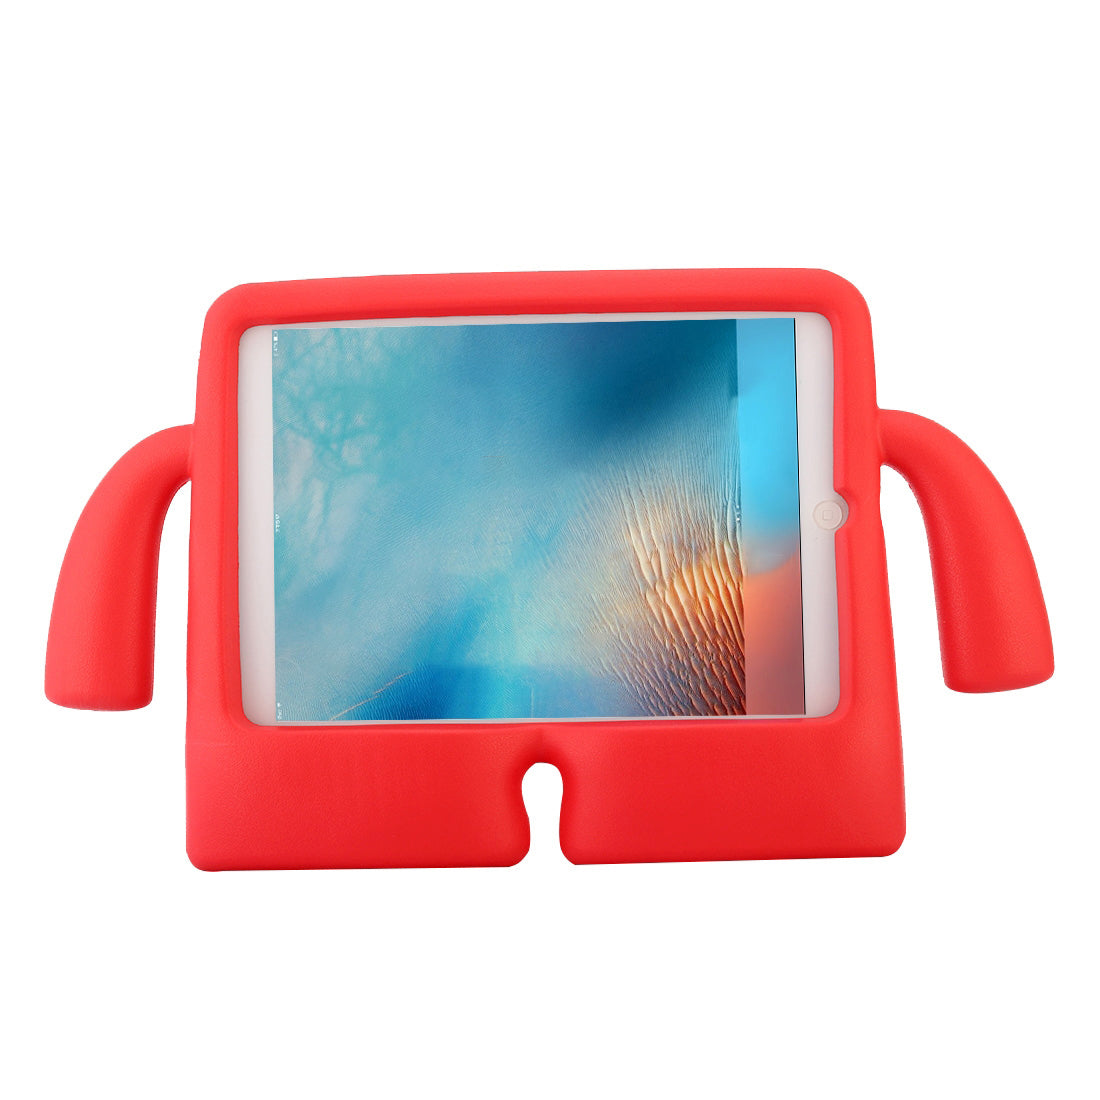 For Samsung Galaxy Tab A 8.0 2019 Kids Case Shockproof Cover With Carry Handle - Red